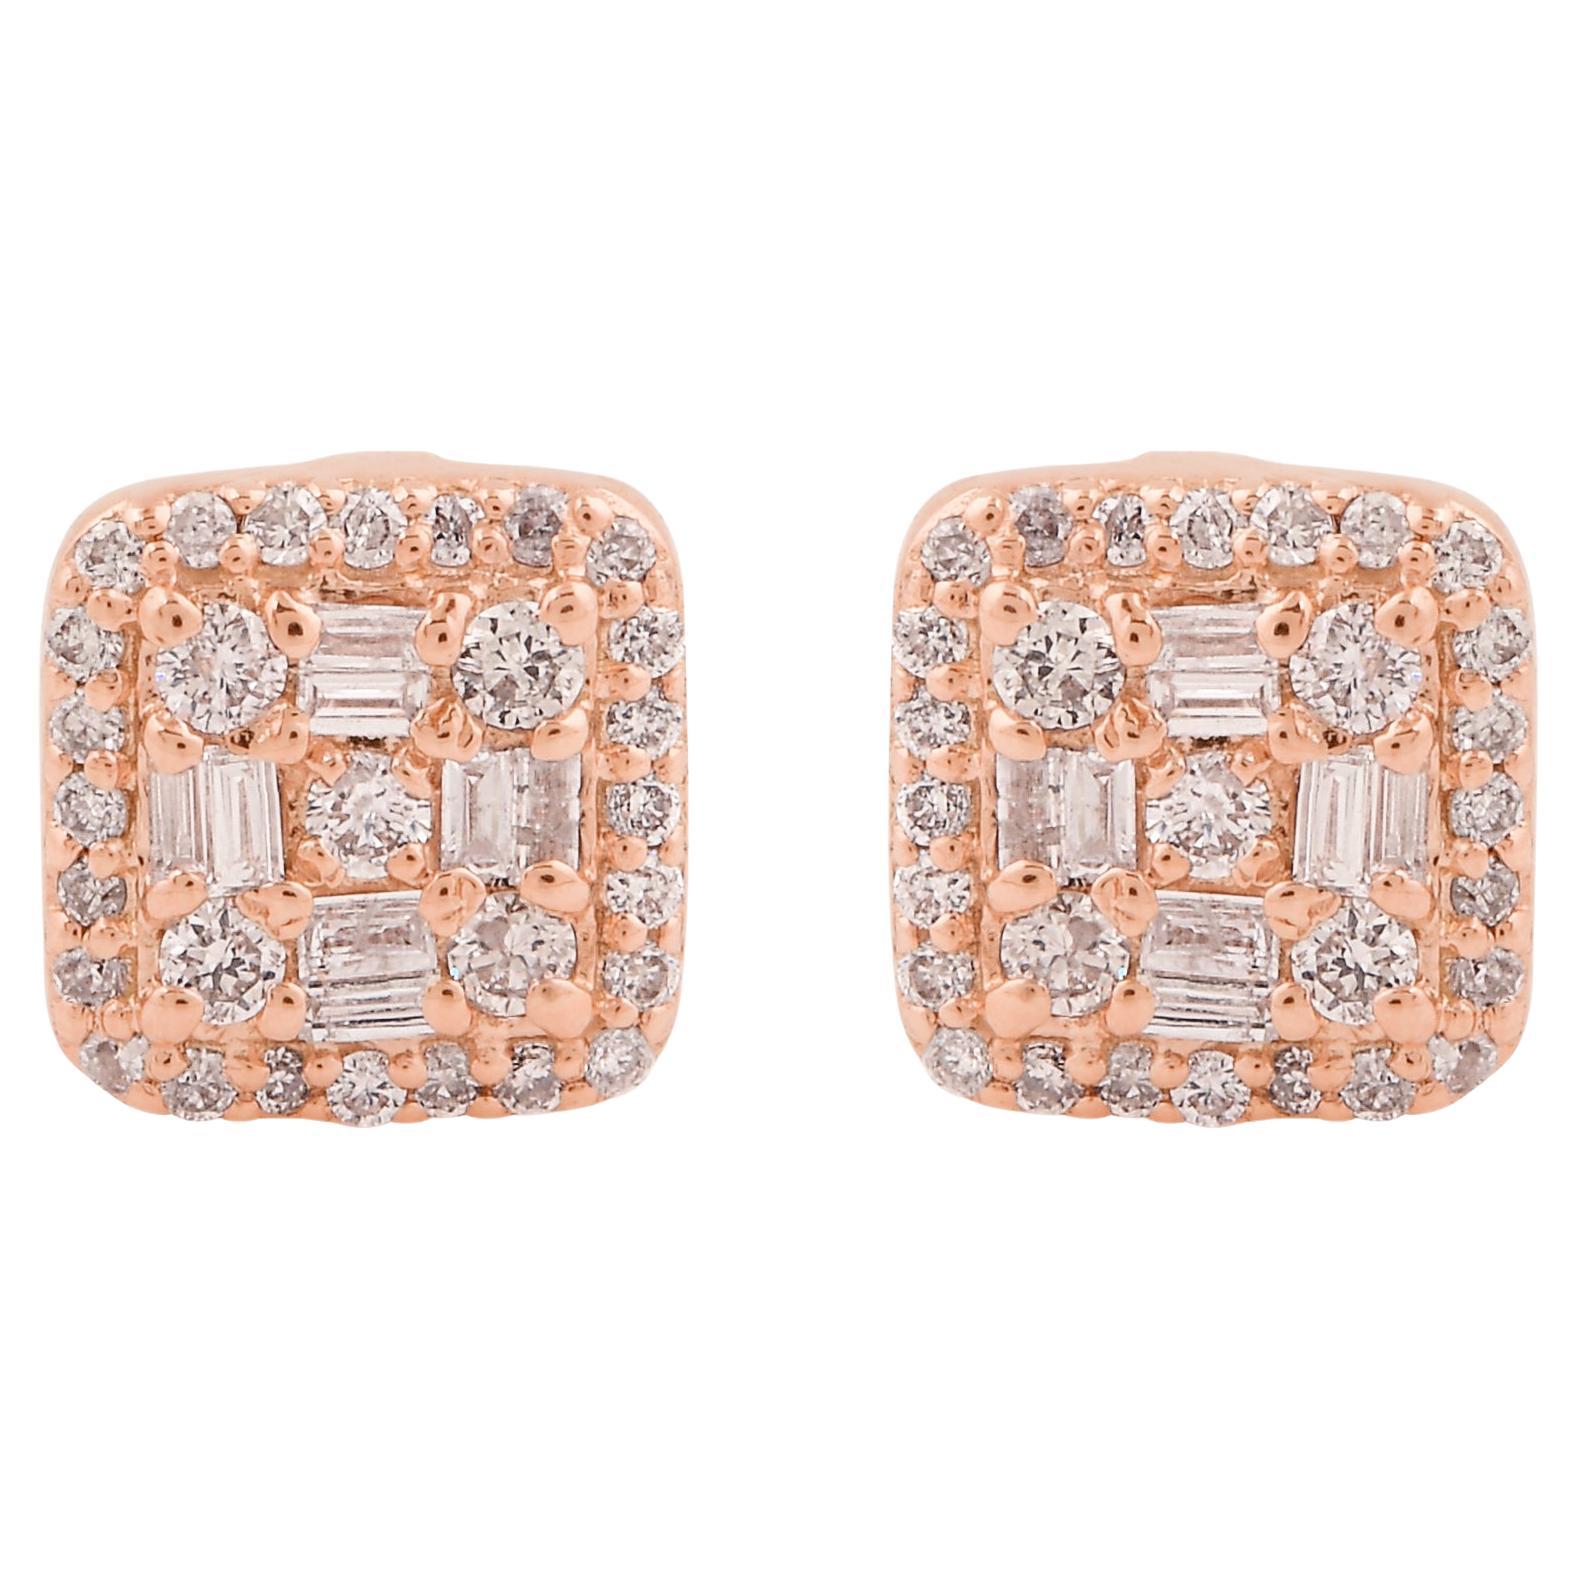 Solid 10k Rose Gold Si Clarity HI Color Diamond Cushion Stud Earrings Jewelry